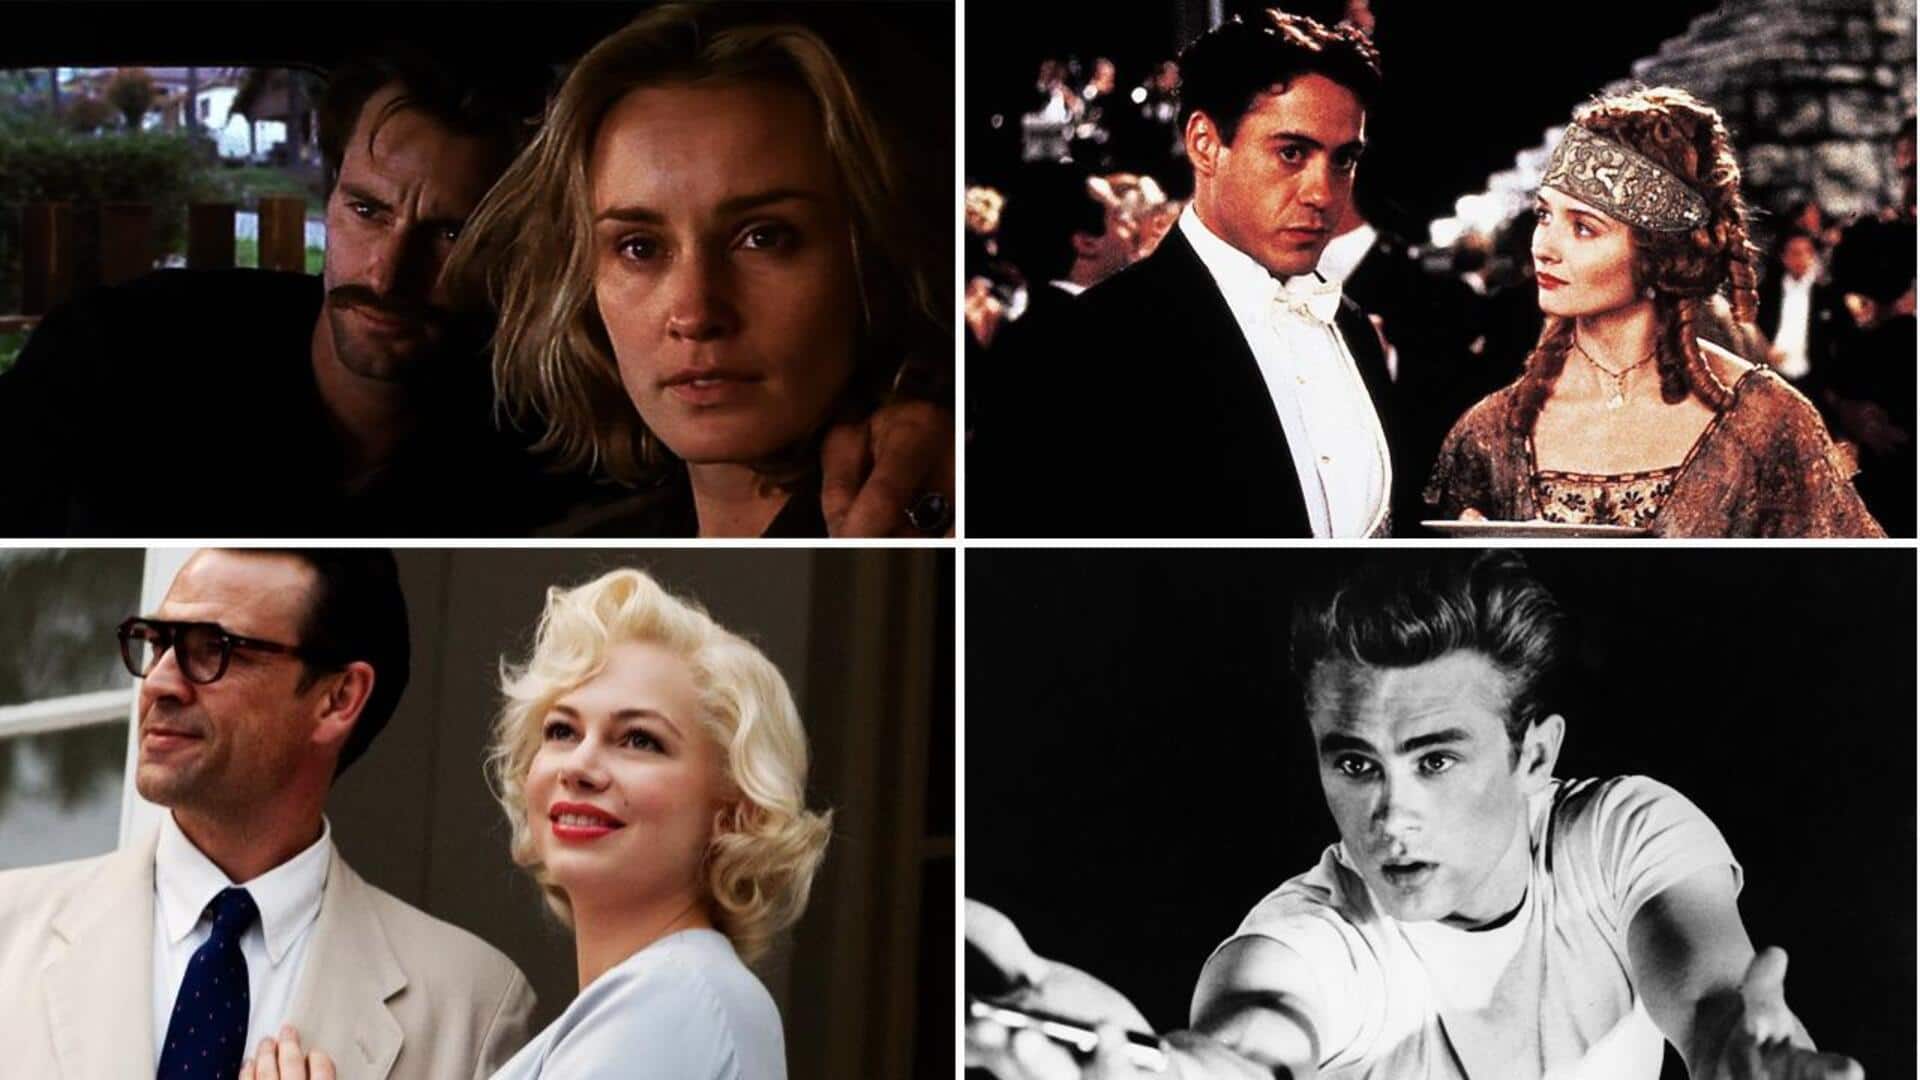 Hollywood biopic based on famous actors